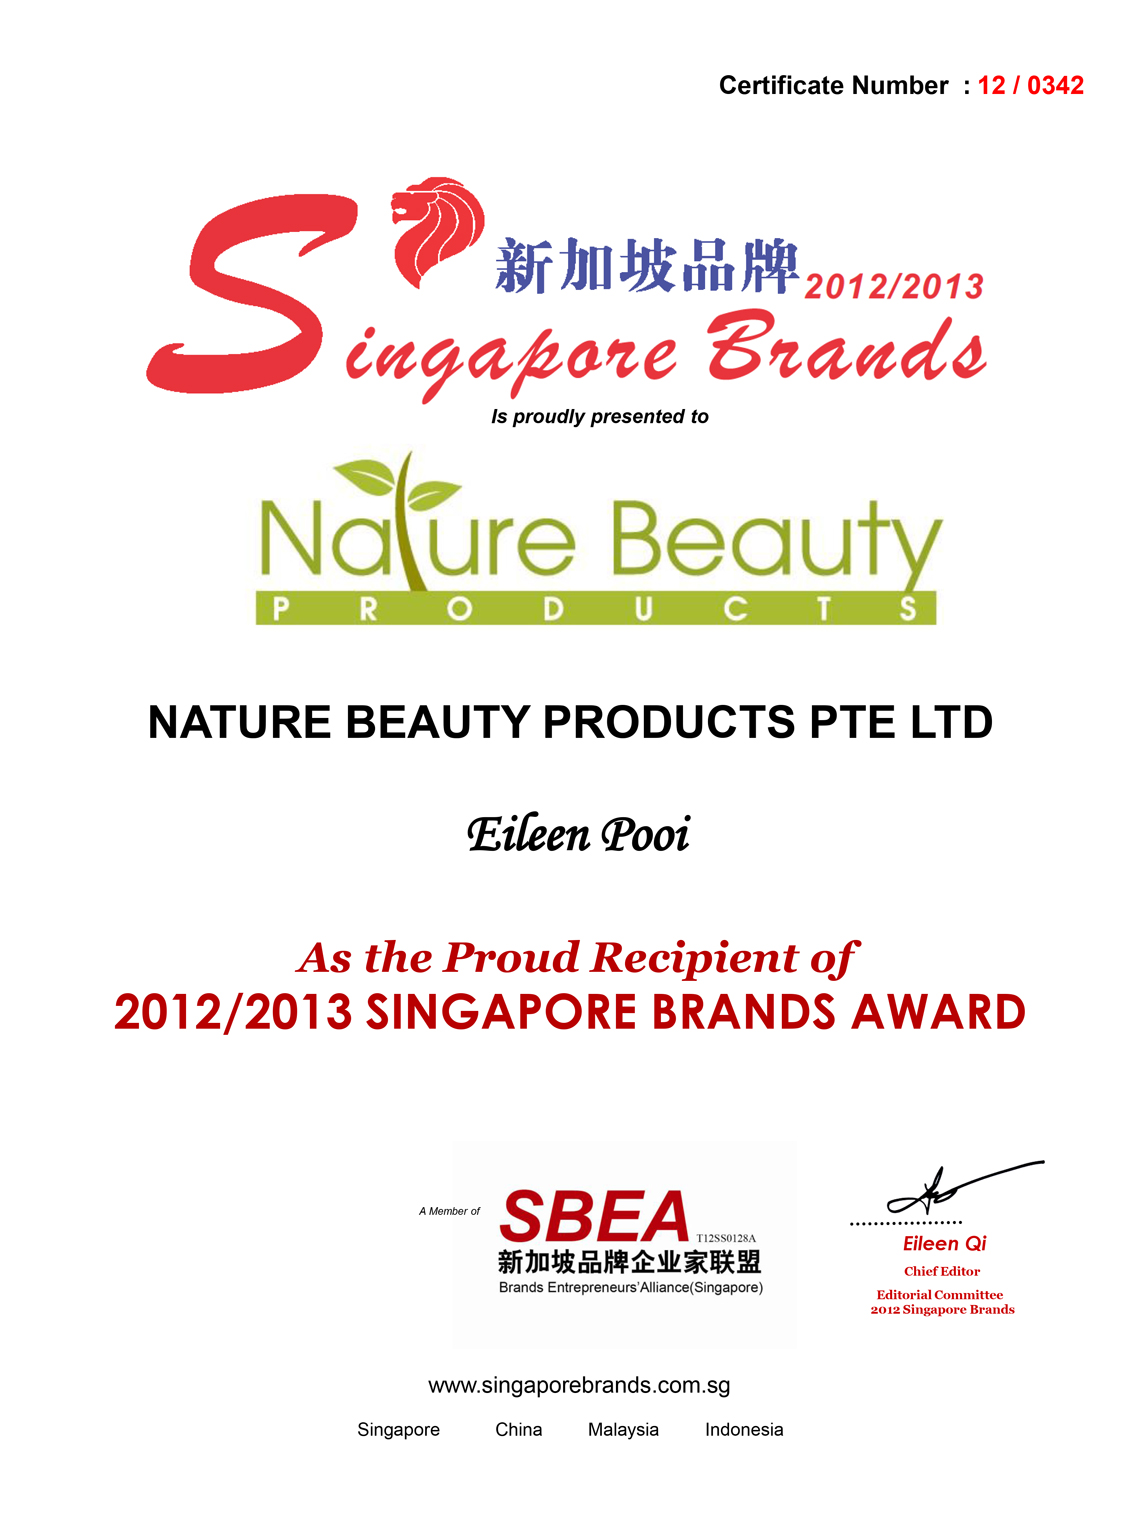 Nature Beauty Products